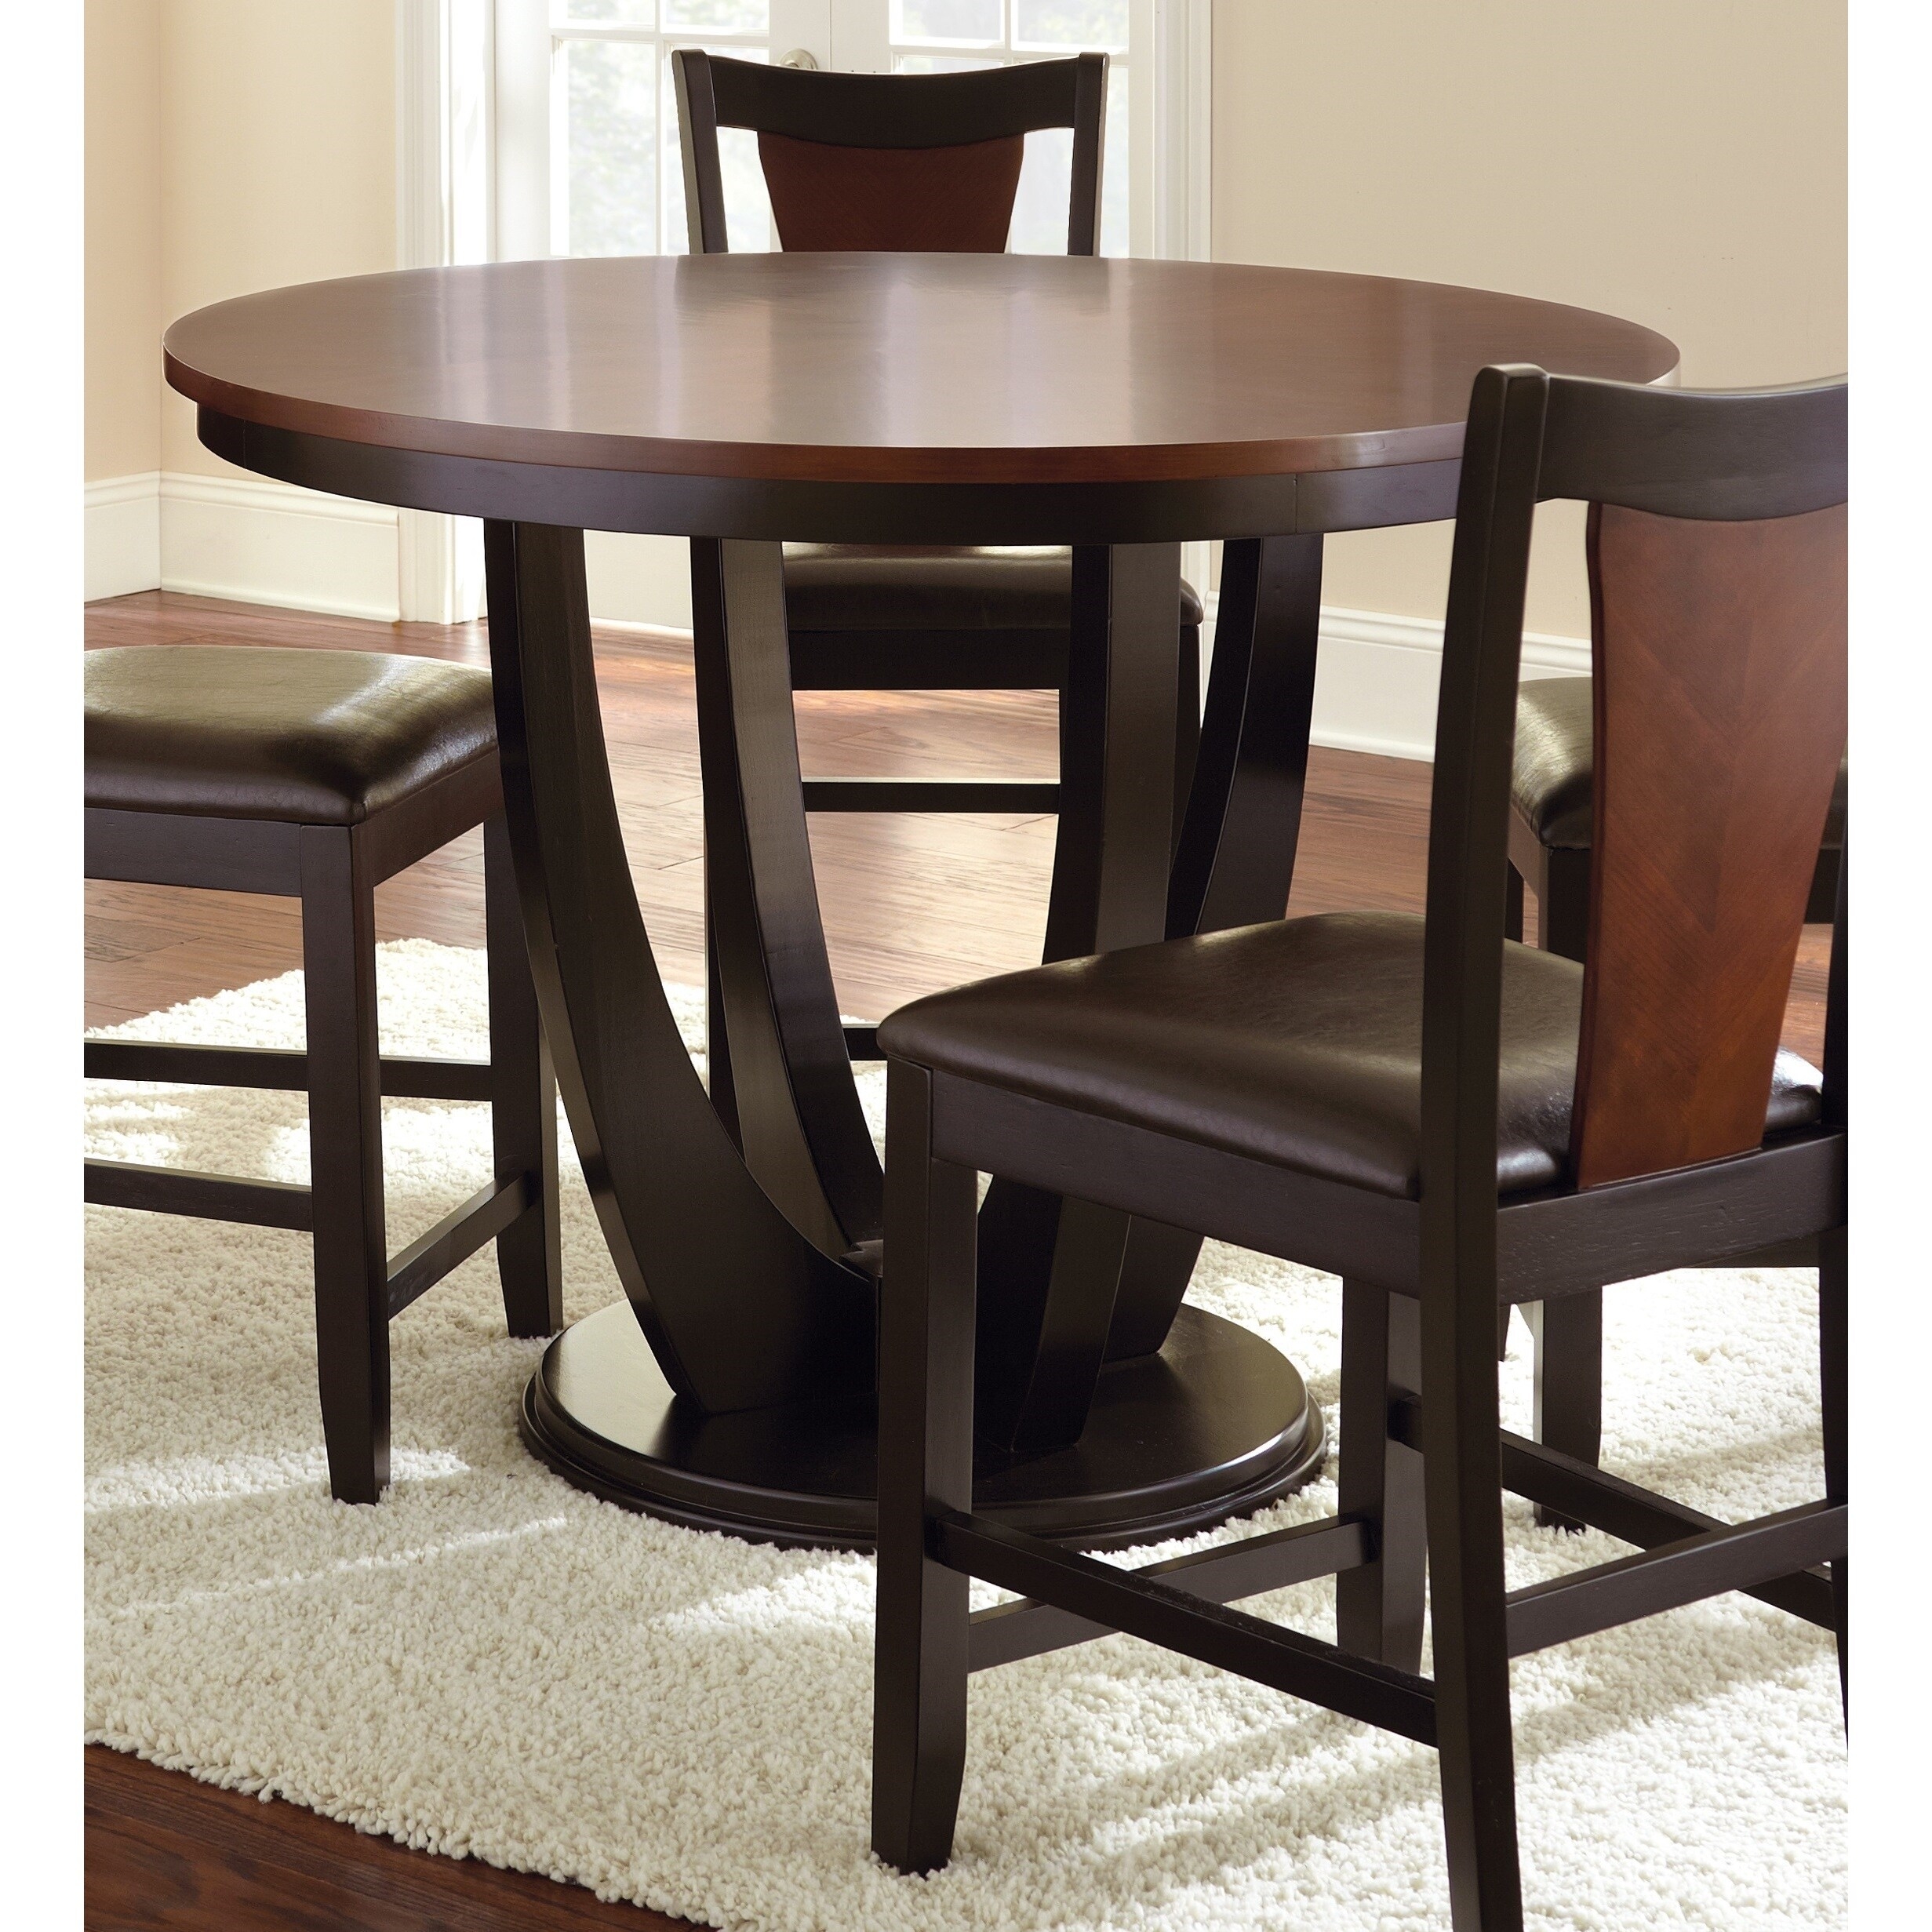 Counter height round dining table 7